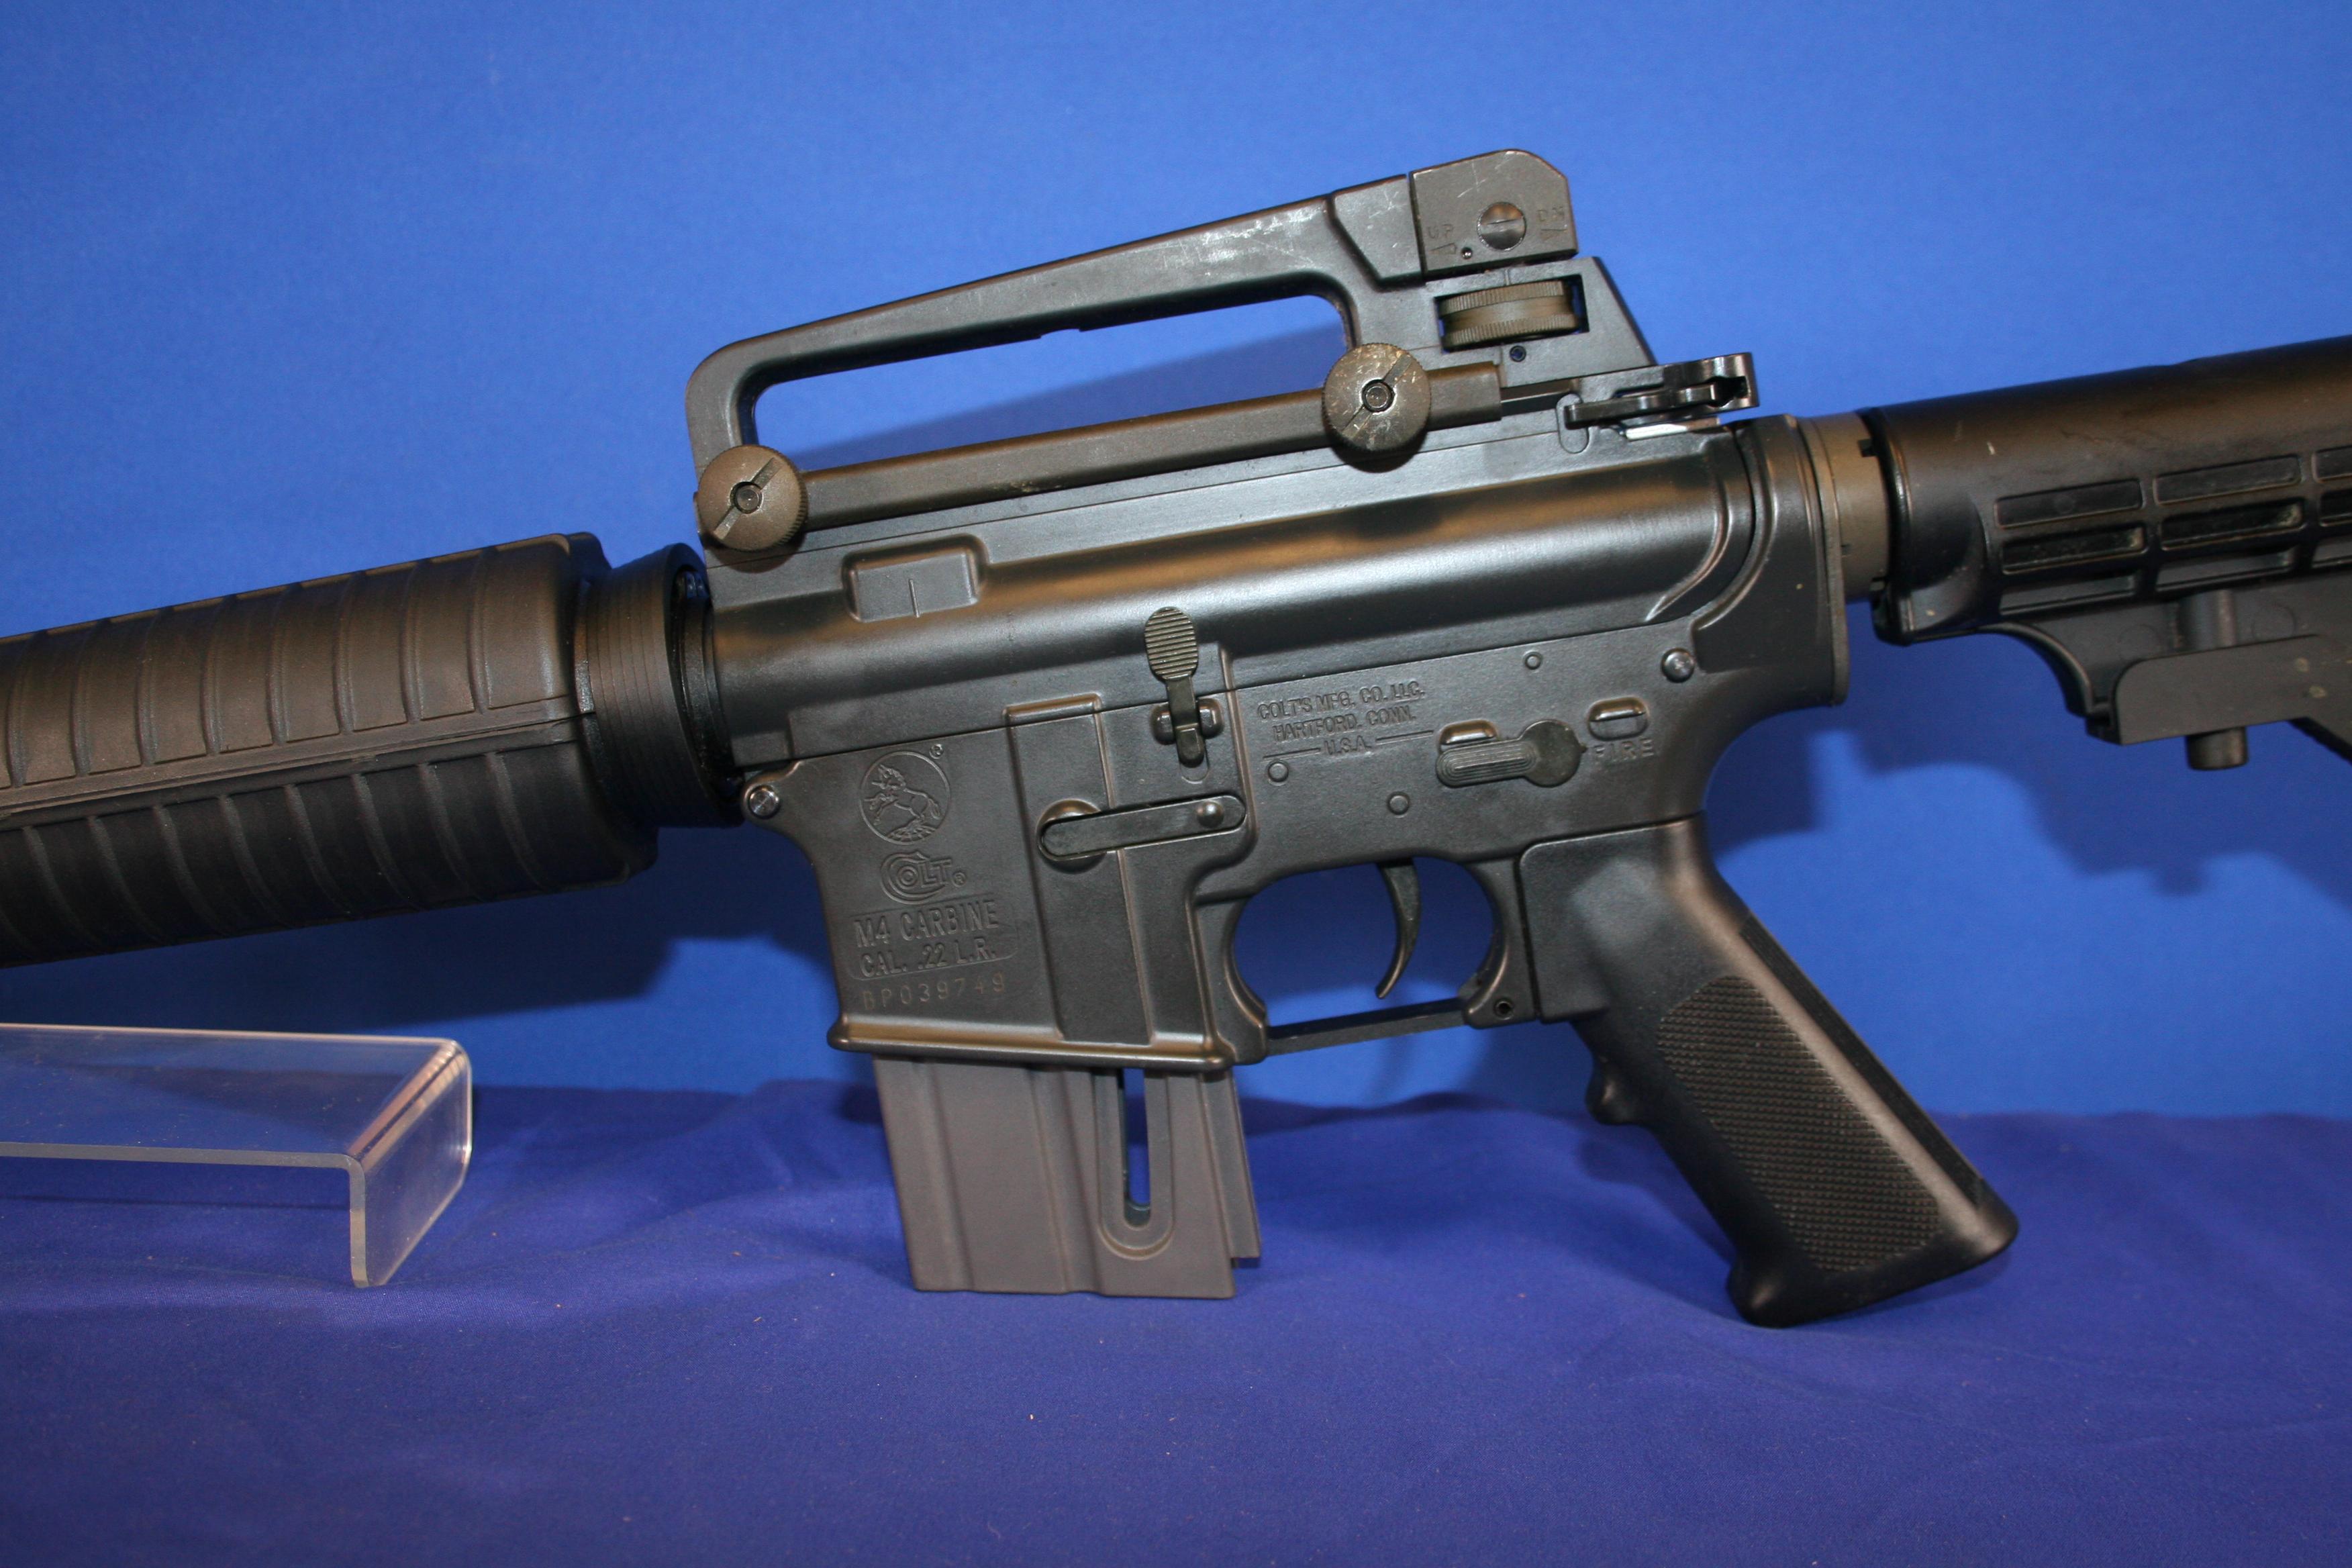 Colt M4 22LR Rifle, 16" Barrel, Two 10-Round Magazines. SN# BP039749.  OK For Sale In California.